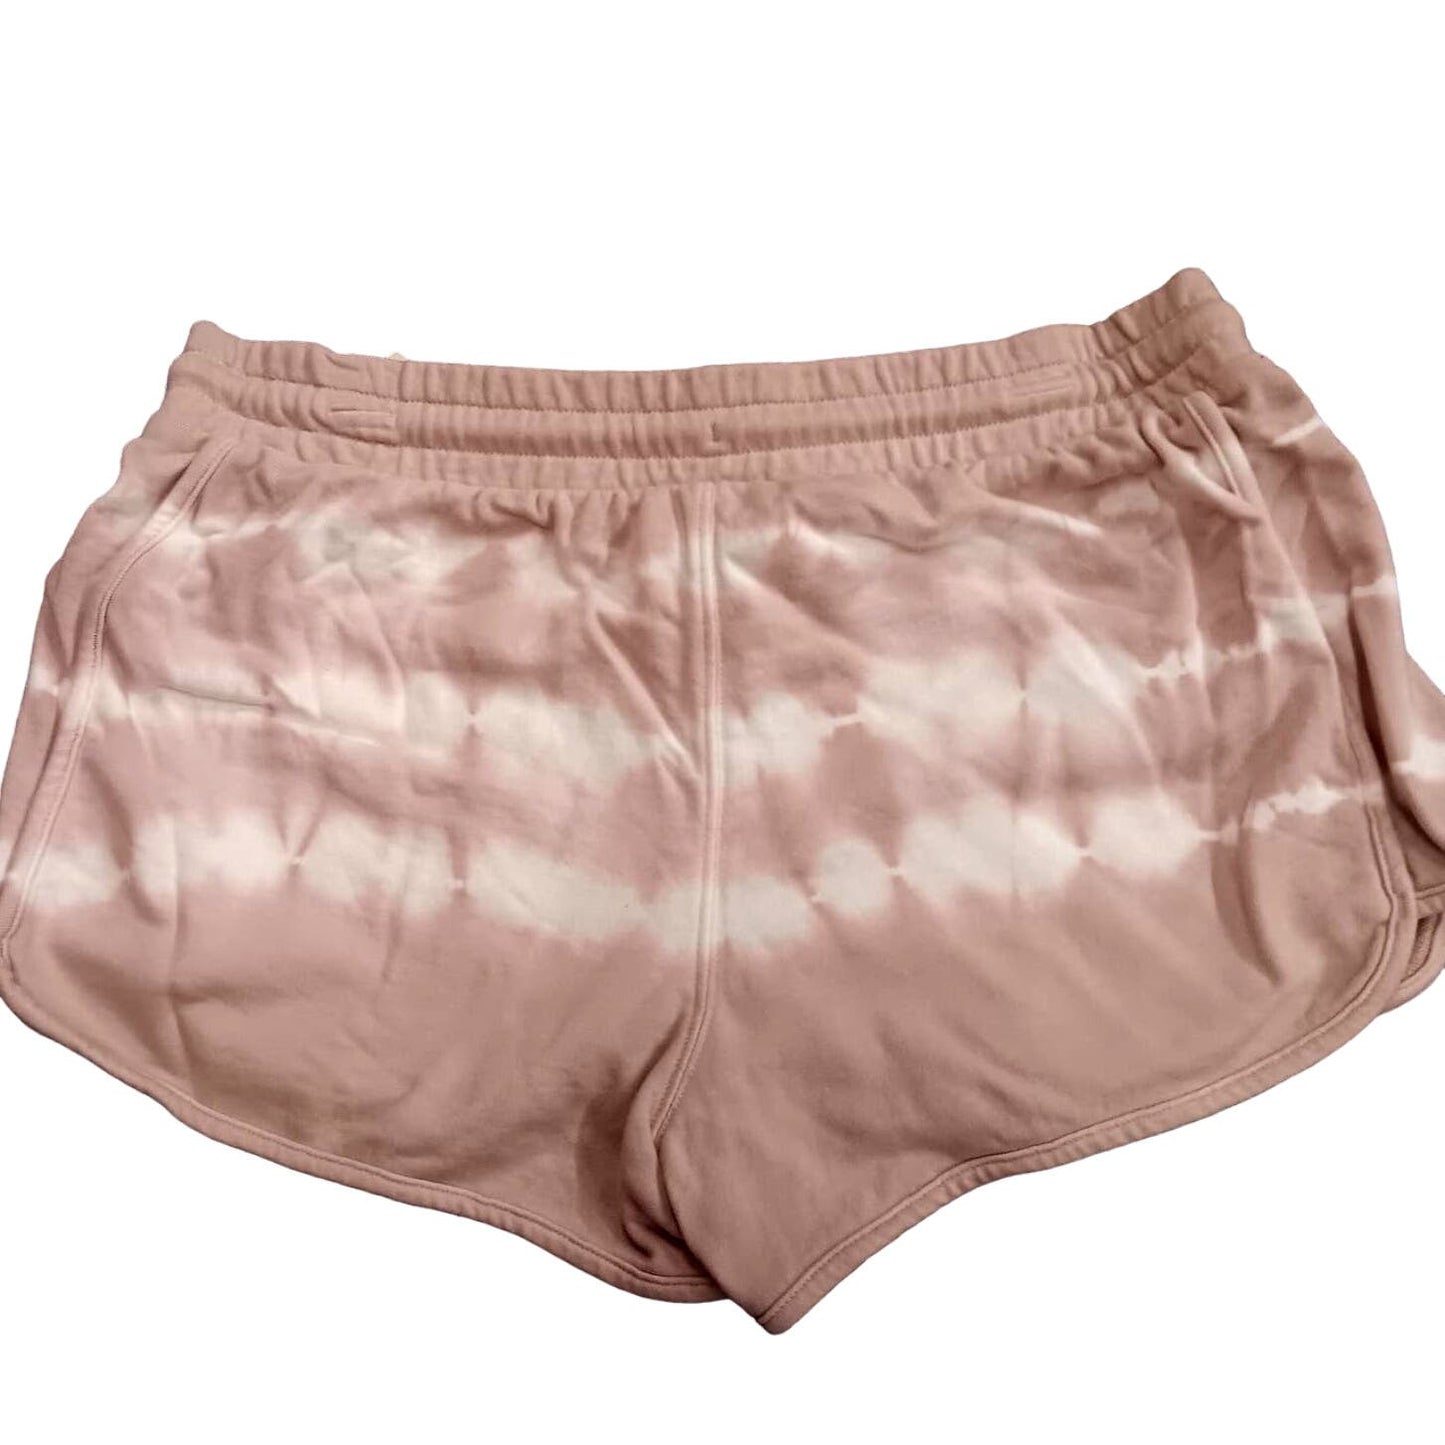 Universal Thread Women's Mid-Rise French Terry Pull-On Shorts - LRG, Tie Dye Tan